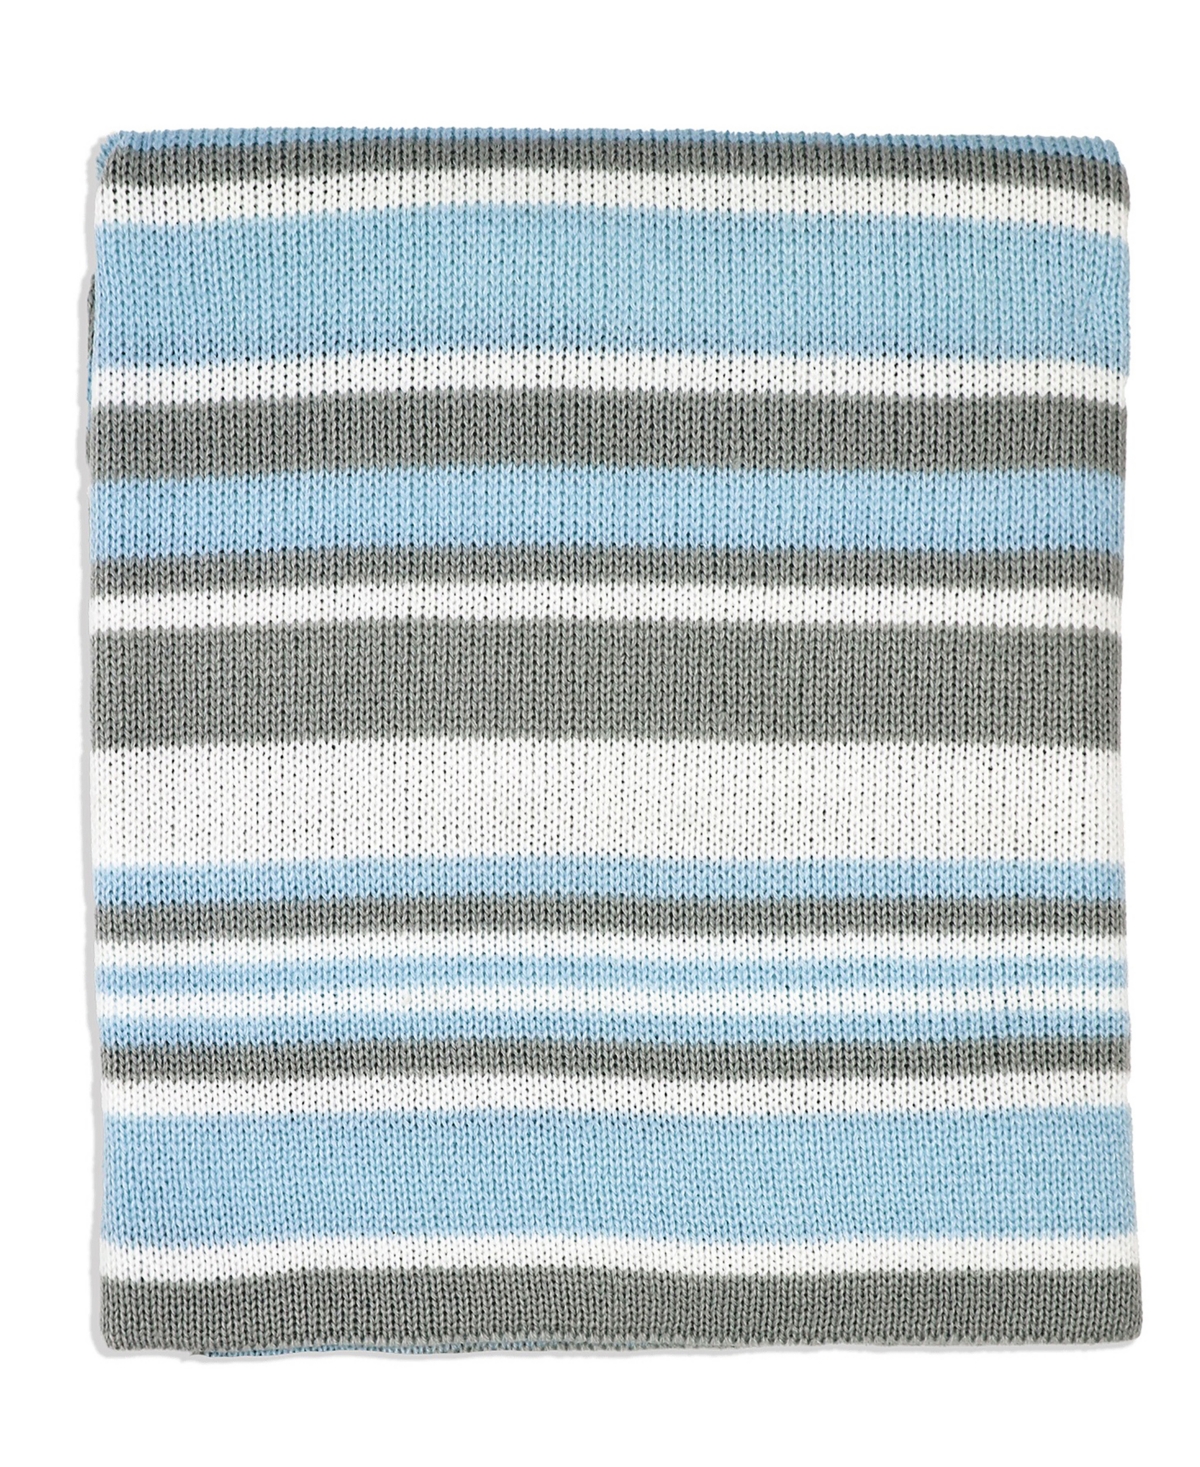 3 Stories Trading Baby Boys Or Baby Girls Cozy Striped Knit Blanket In Aqua Blue And Gray